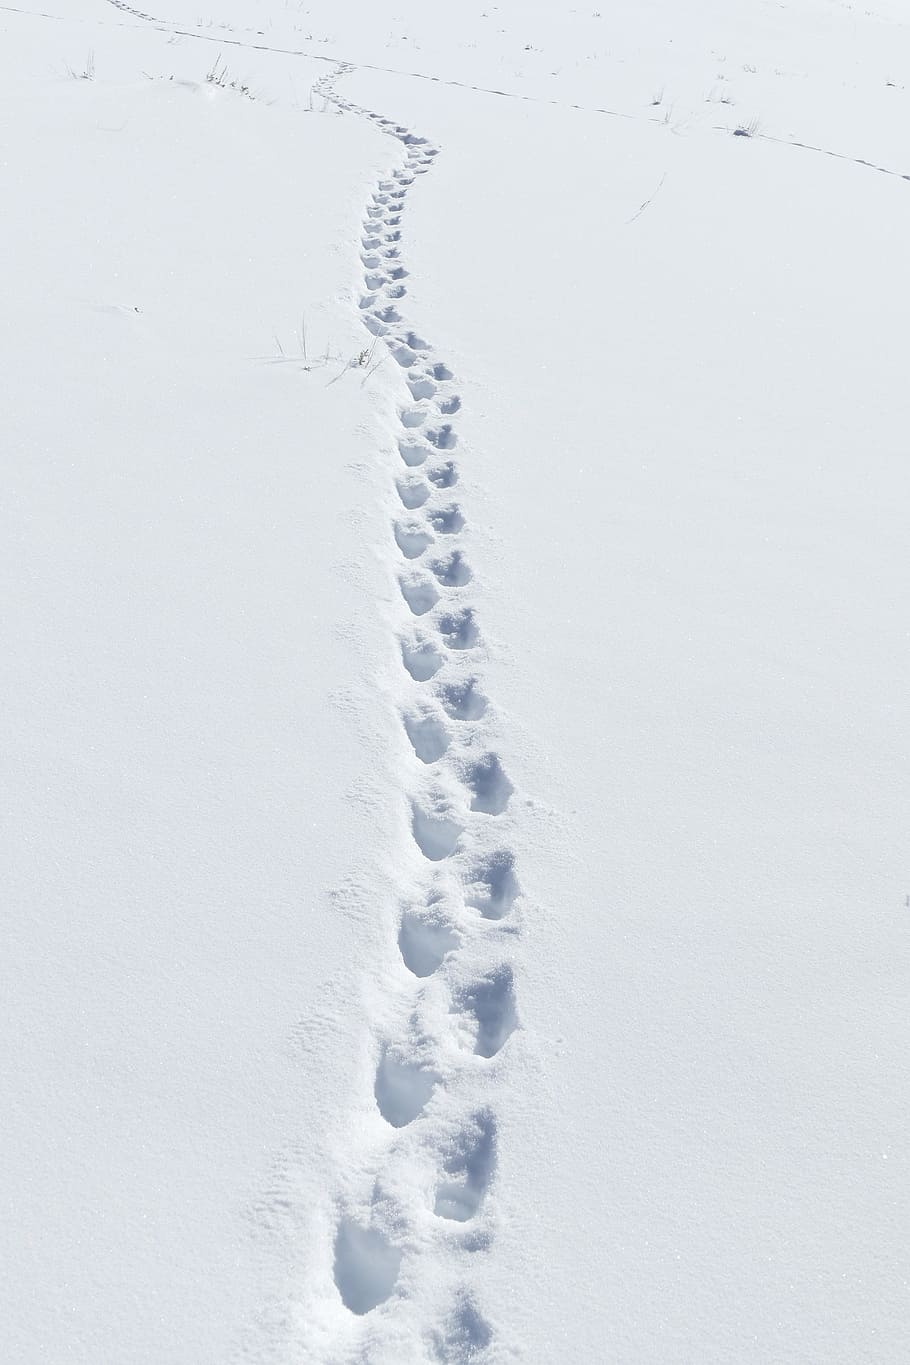 snow, badger tracks, wildlife, nature, winter, cold, footprint, outdoors, trail, white color